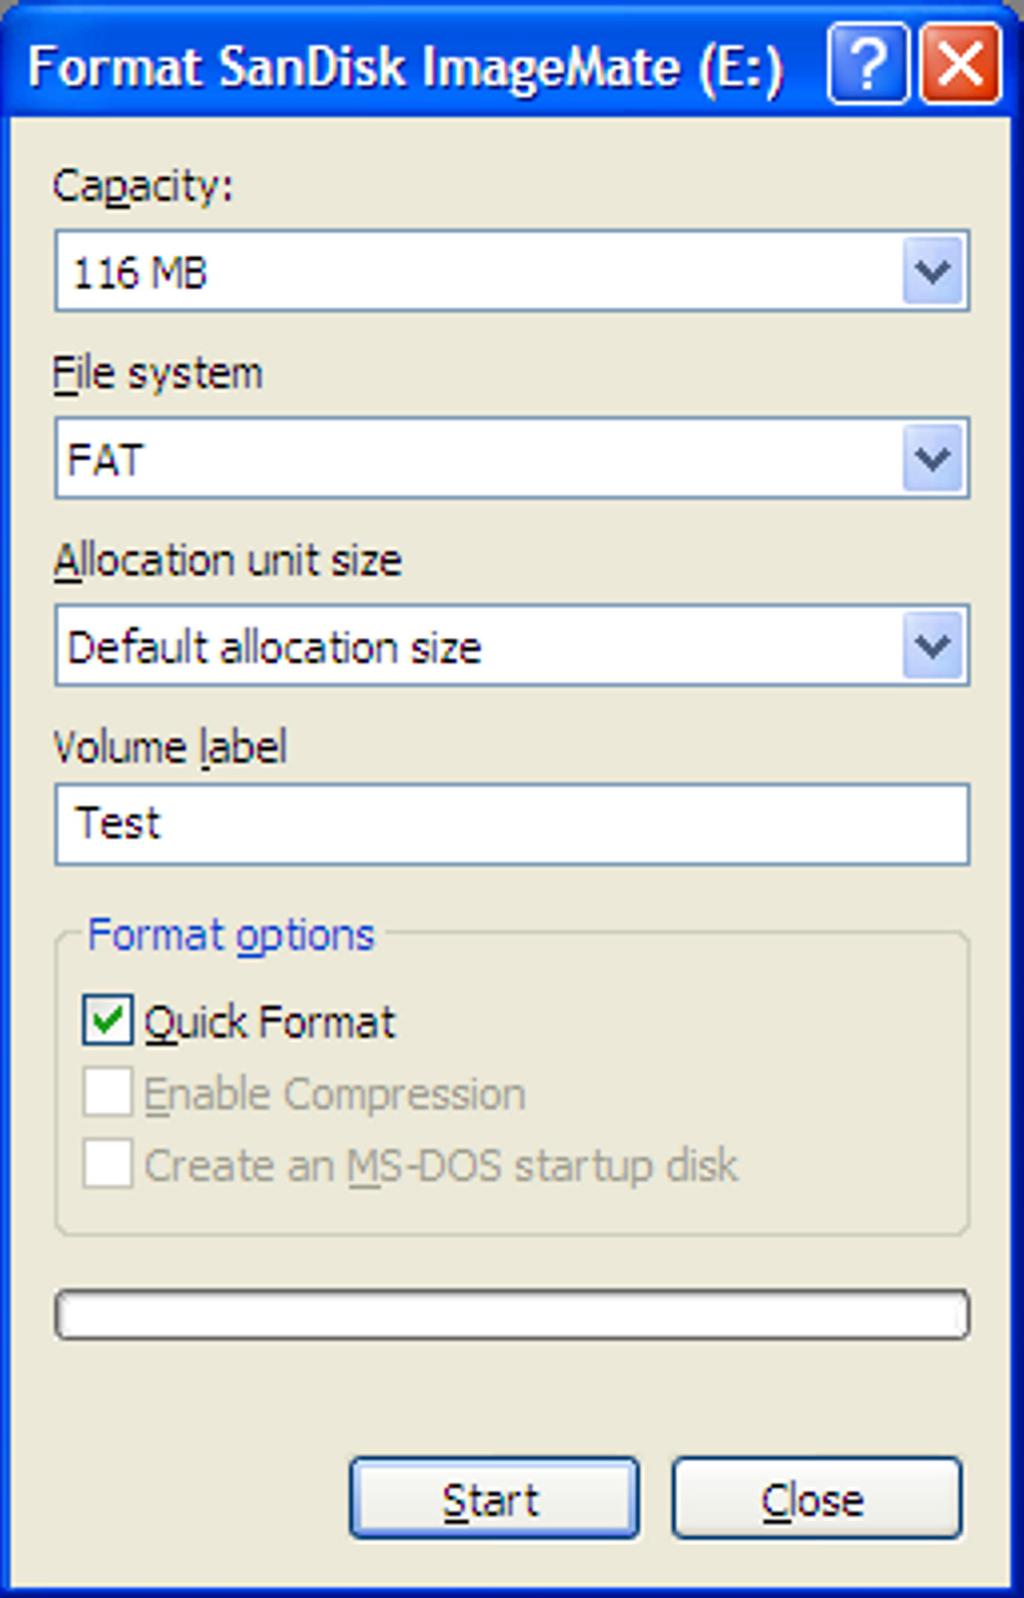 August 2006 Electra Elite IPK II 4. When Figure 17 In-Mail Utility Format Selections Screen is displayed, select the options on the screen and provide the appropriate information.